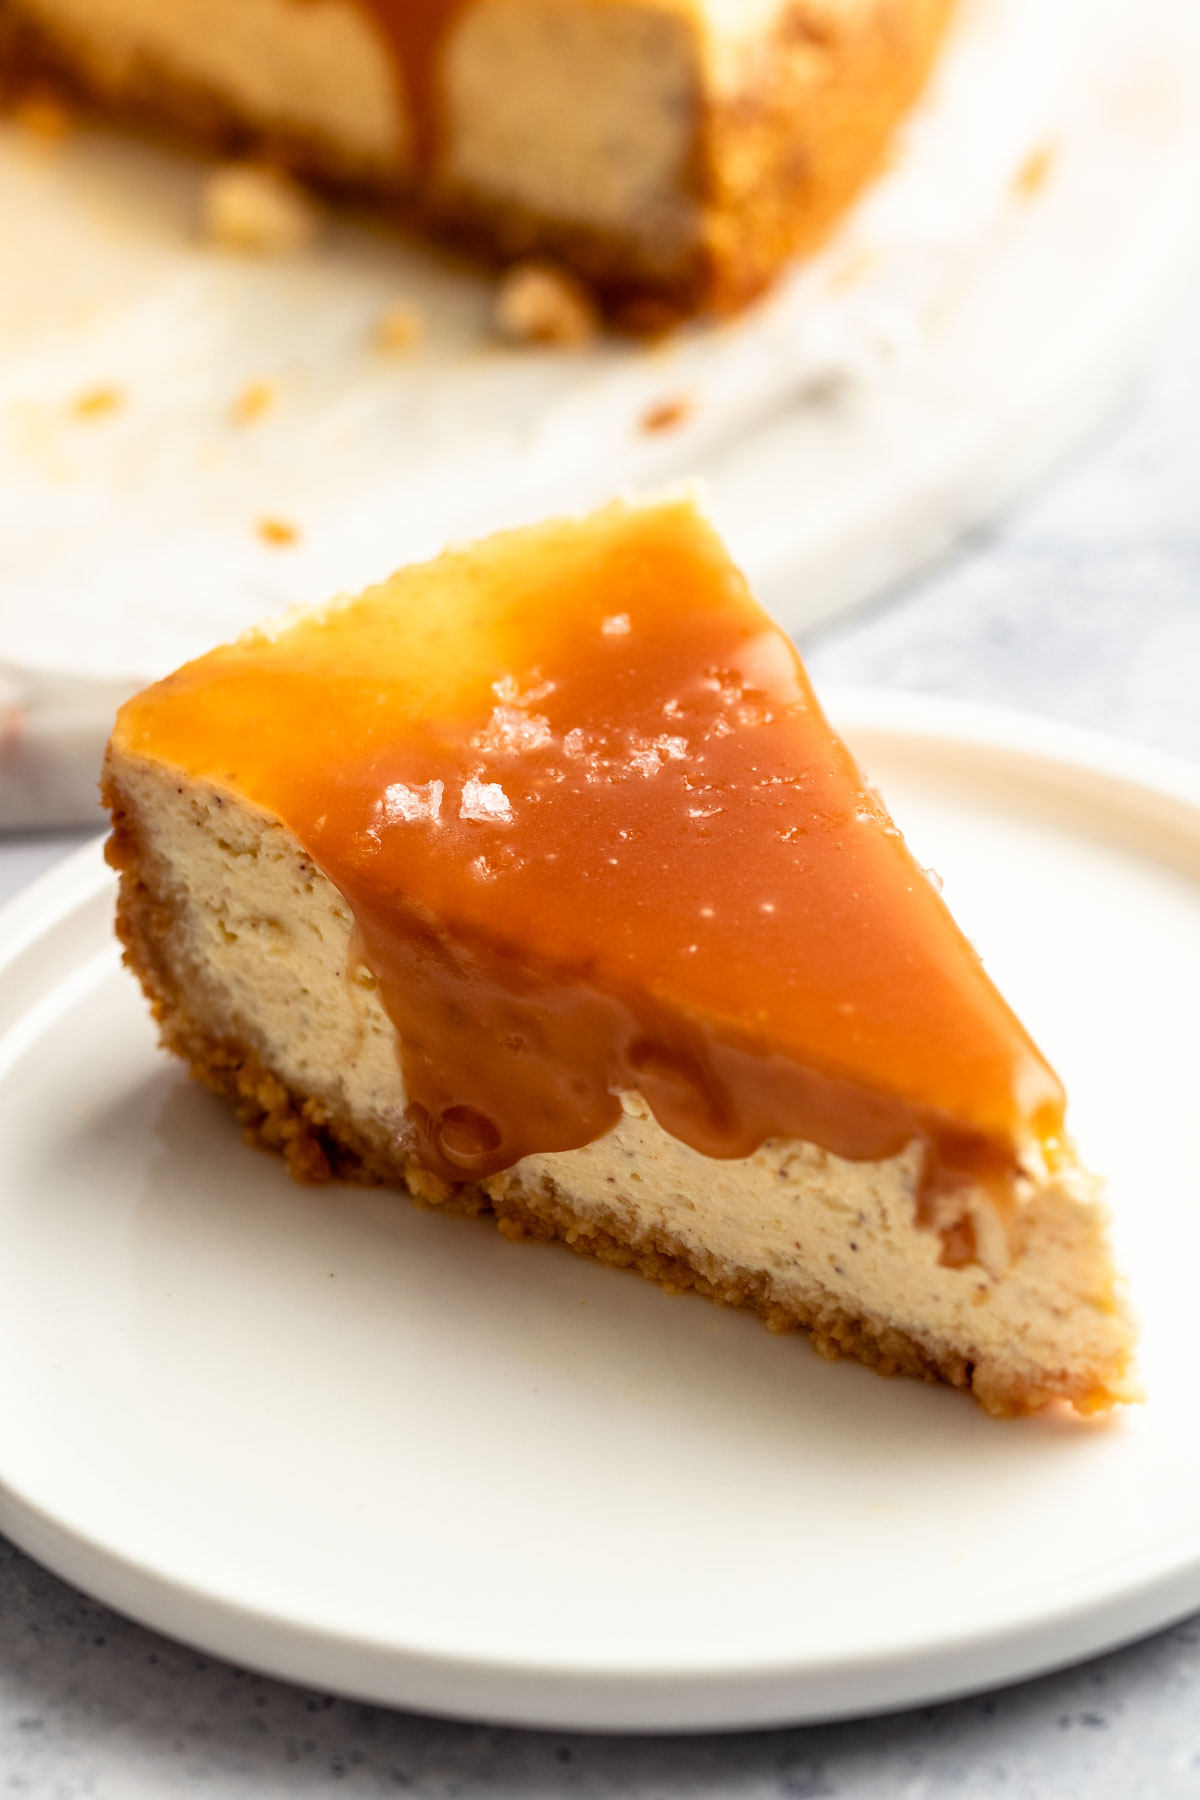 Slice of salted caramel cheesecake with caramel sauce on top.